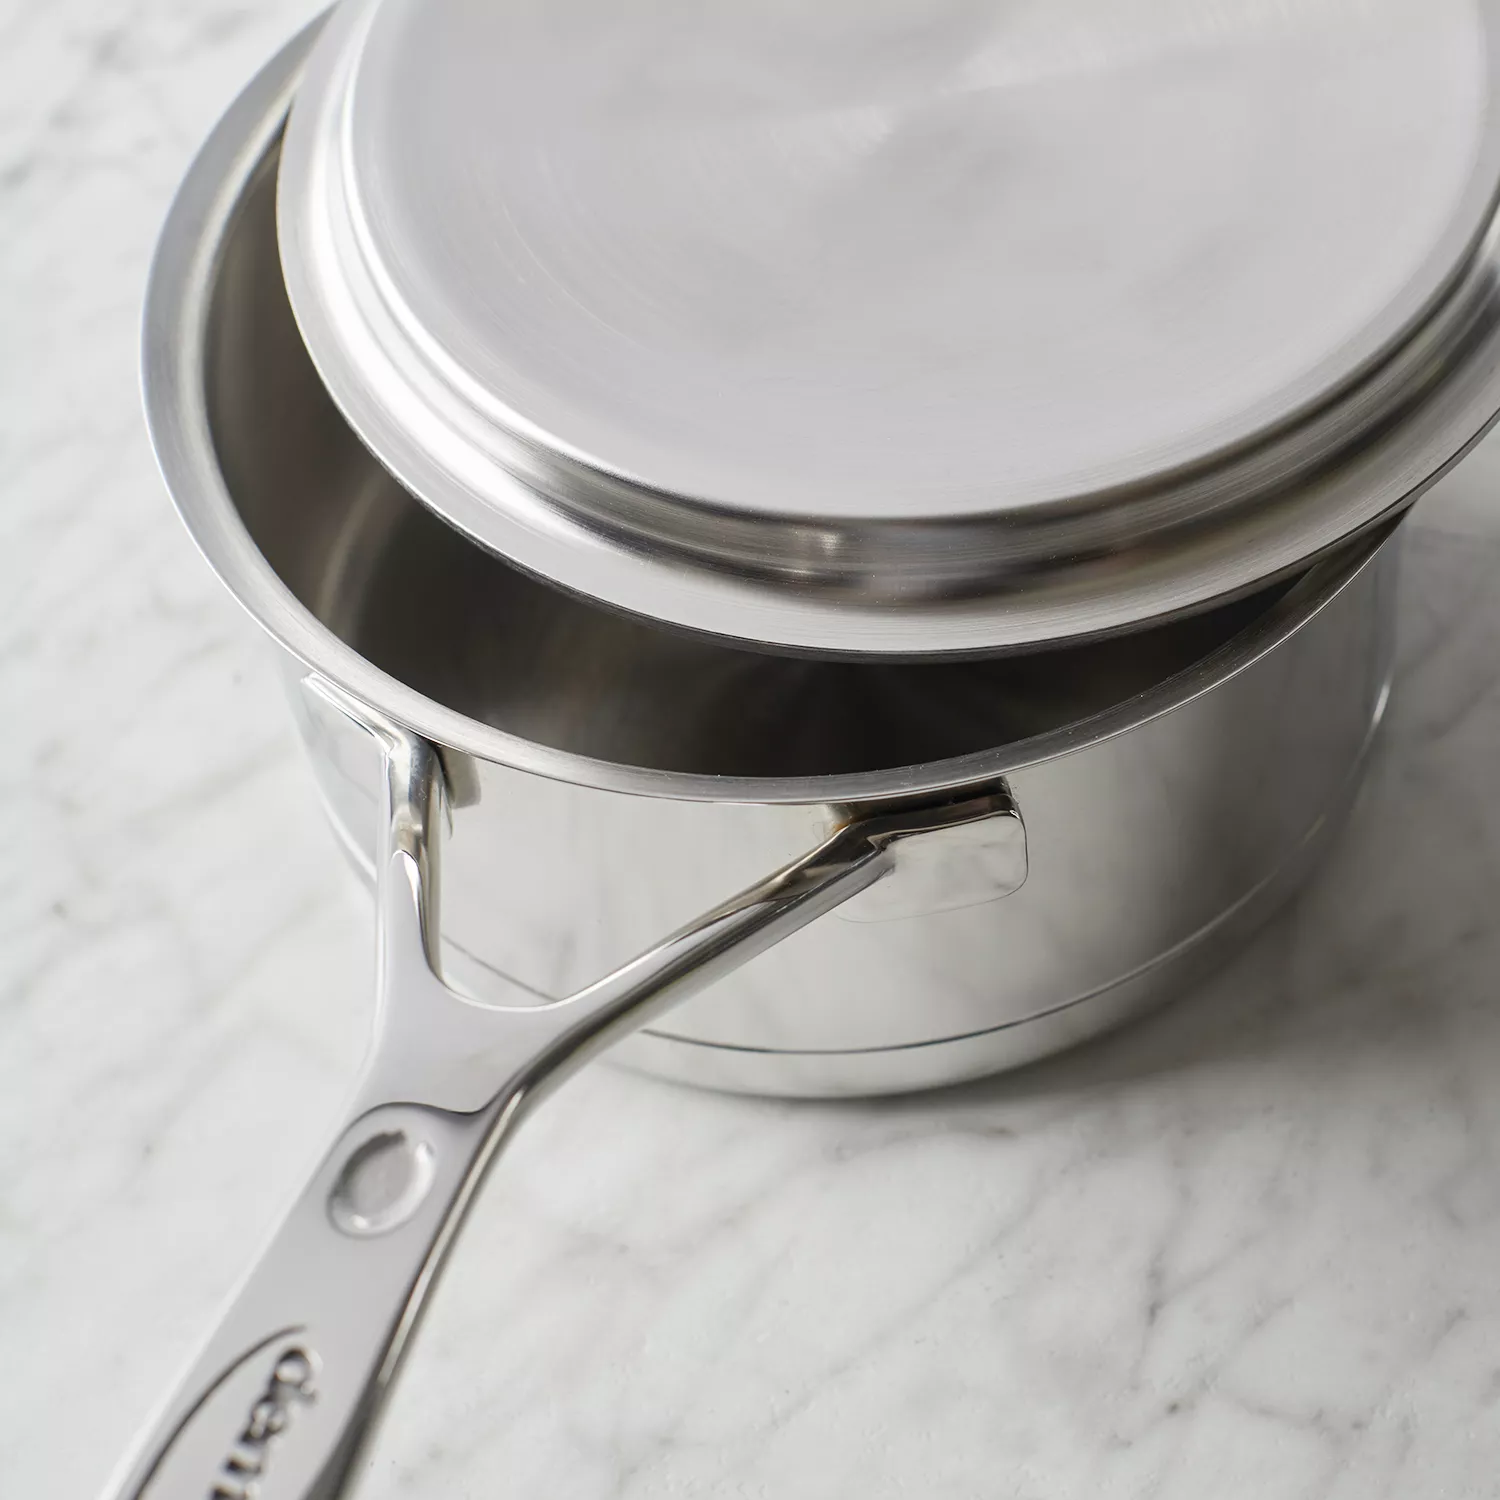 Demeyere Silver7 Stainless Steel Sauté Pan with Lid, Silver